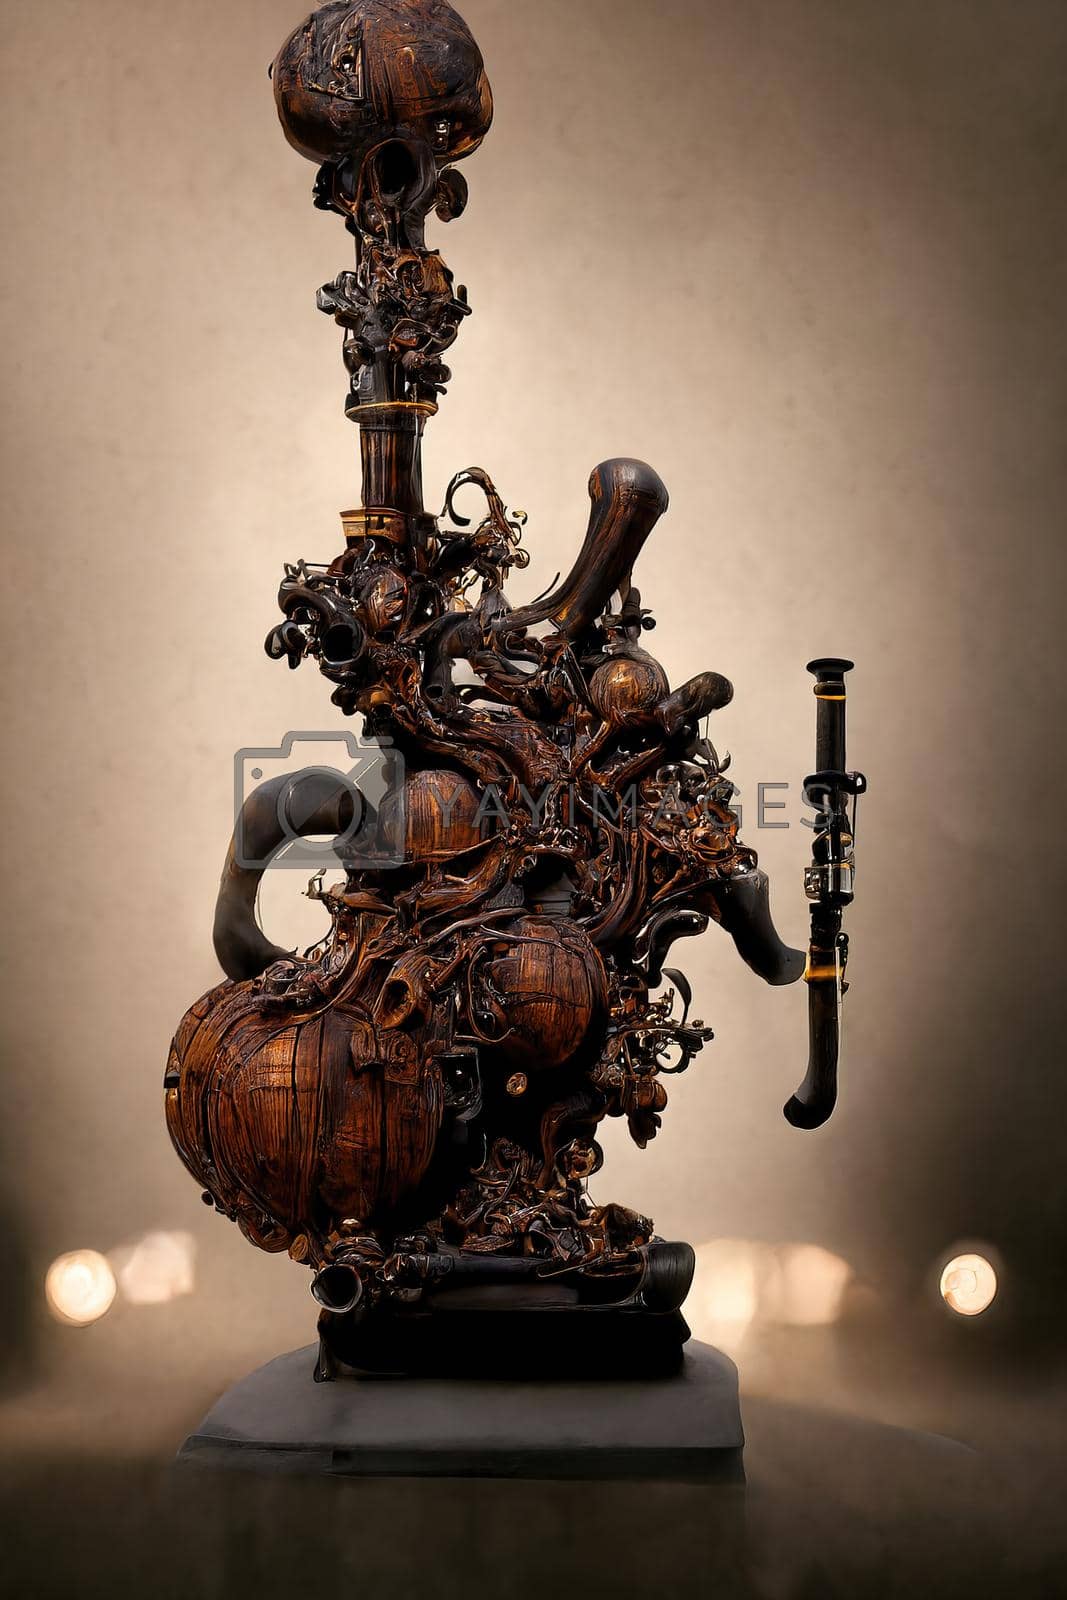 Royalty free image of Baroque sculpture of bagpipe, 3d render by Farcas